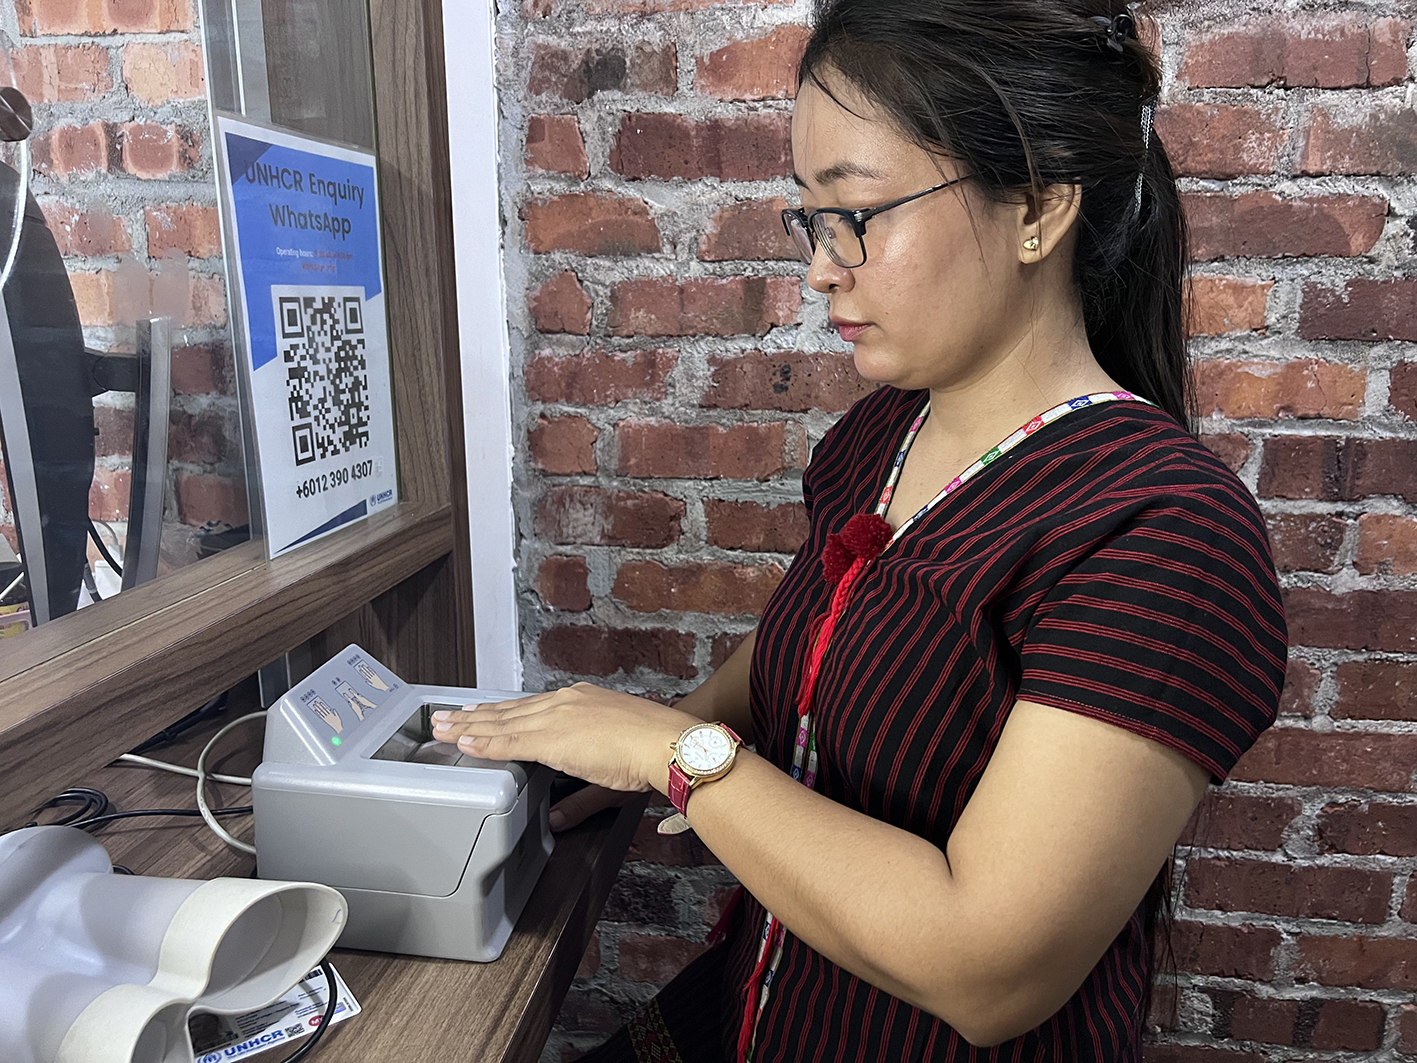 “I was 16 years old, and I was very nervous to use the machine,” she said, referring to the biometrics scanner used in UNHCR’s biometric identity management system.  Today, renewing her UNHCR card and using the biometrics scanner is routine.